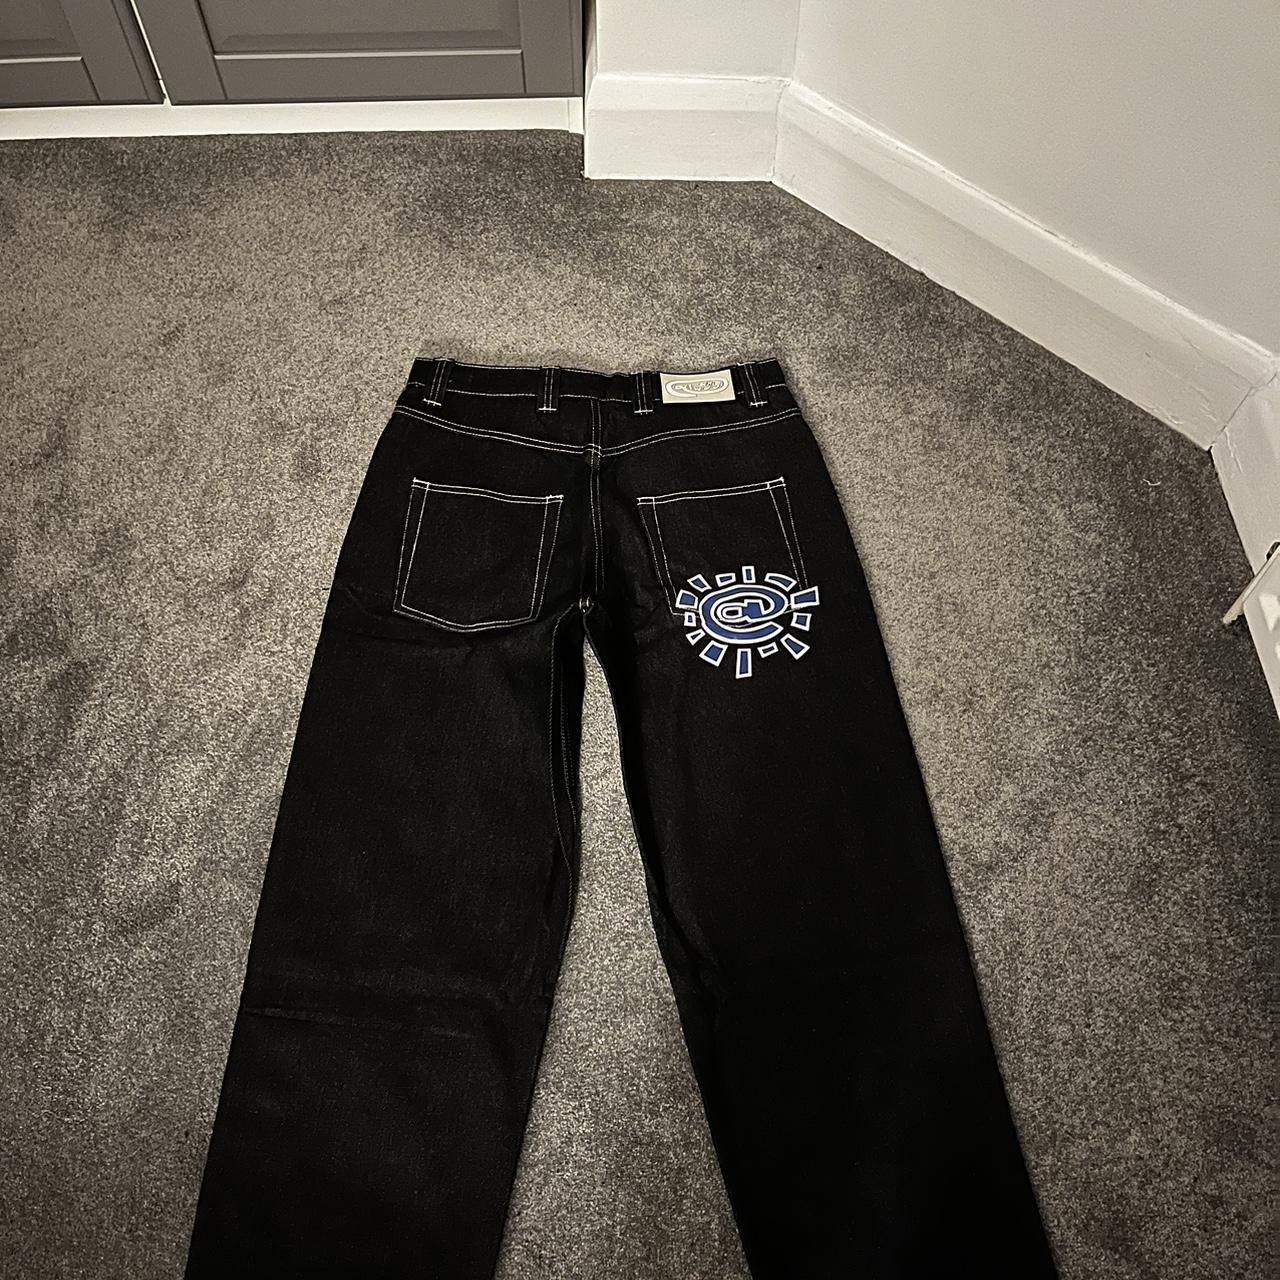 Adwysd ‘always do what you should do’ Jeans Blue... - Depop